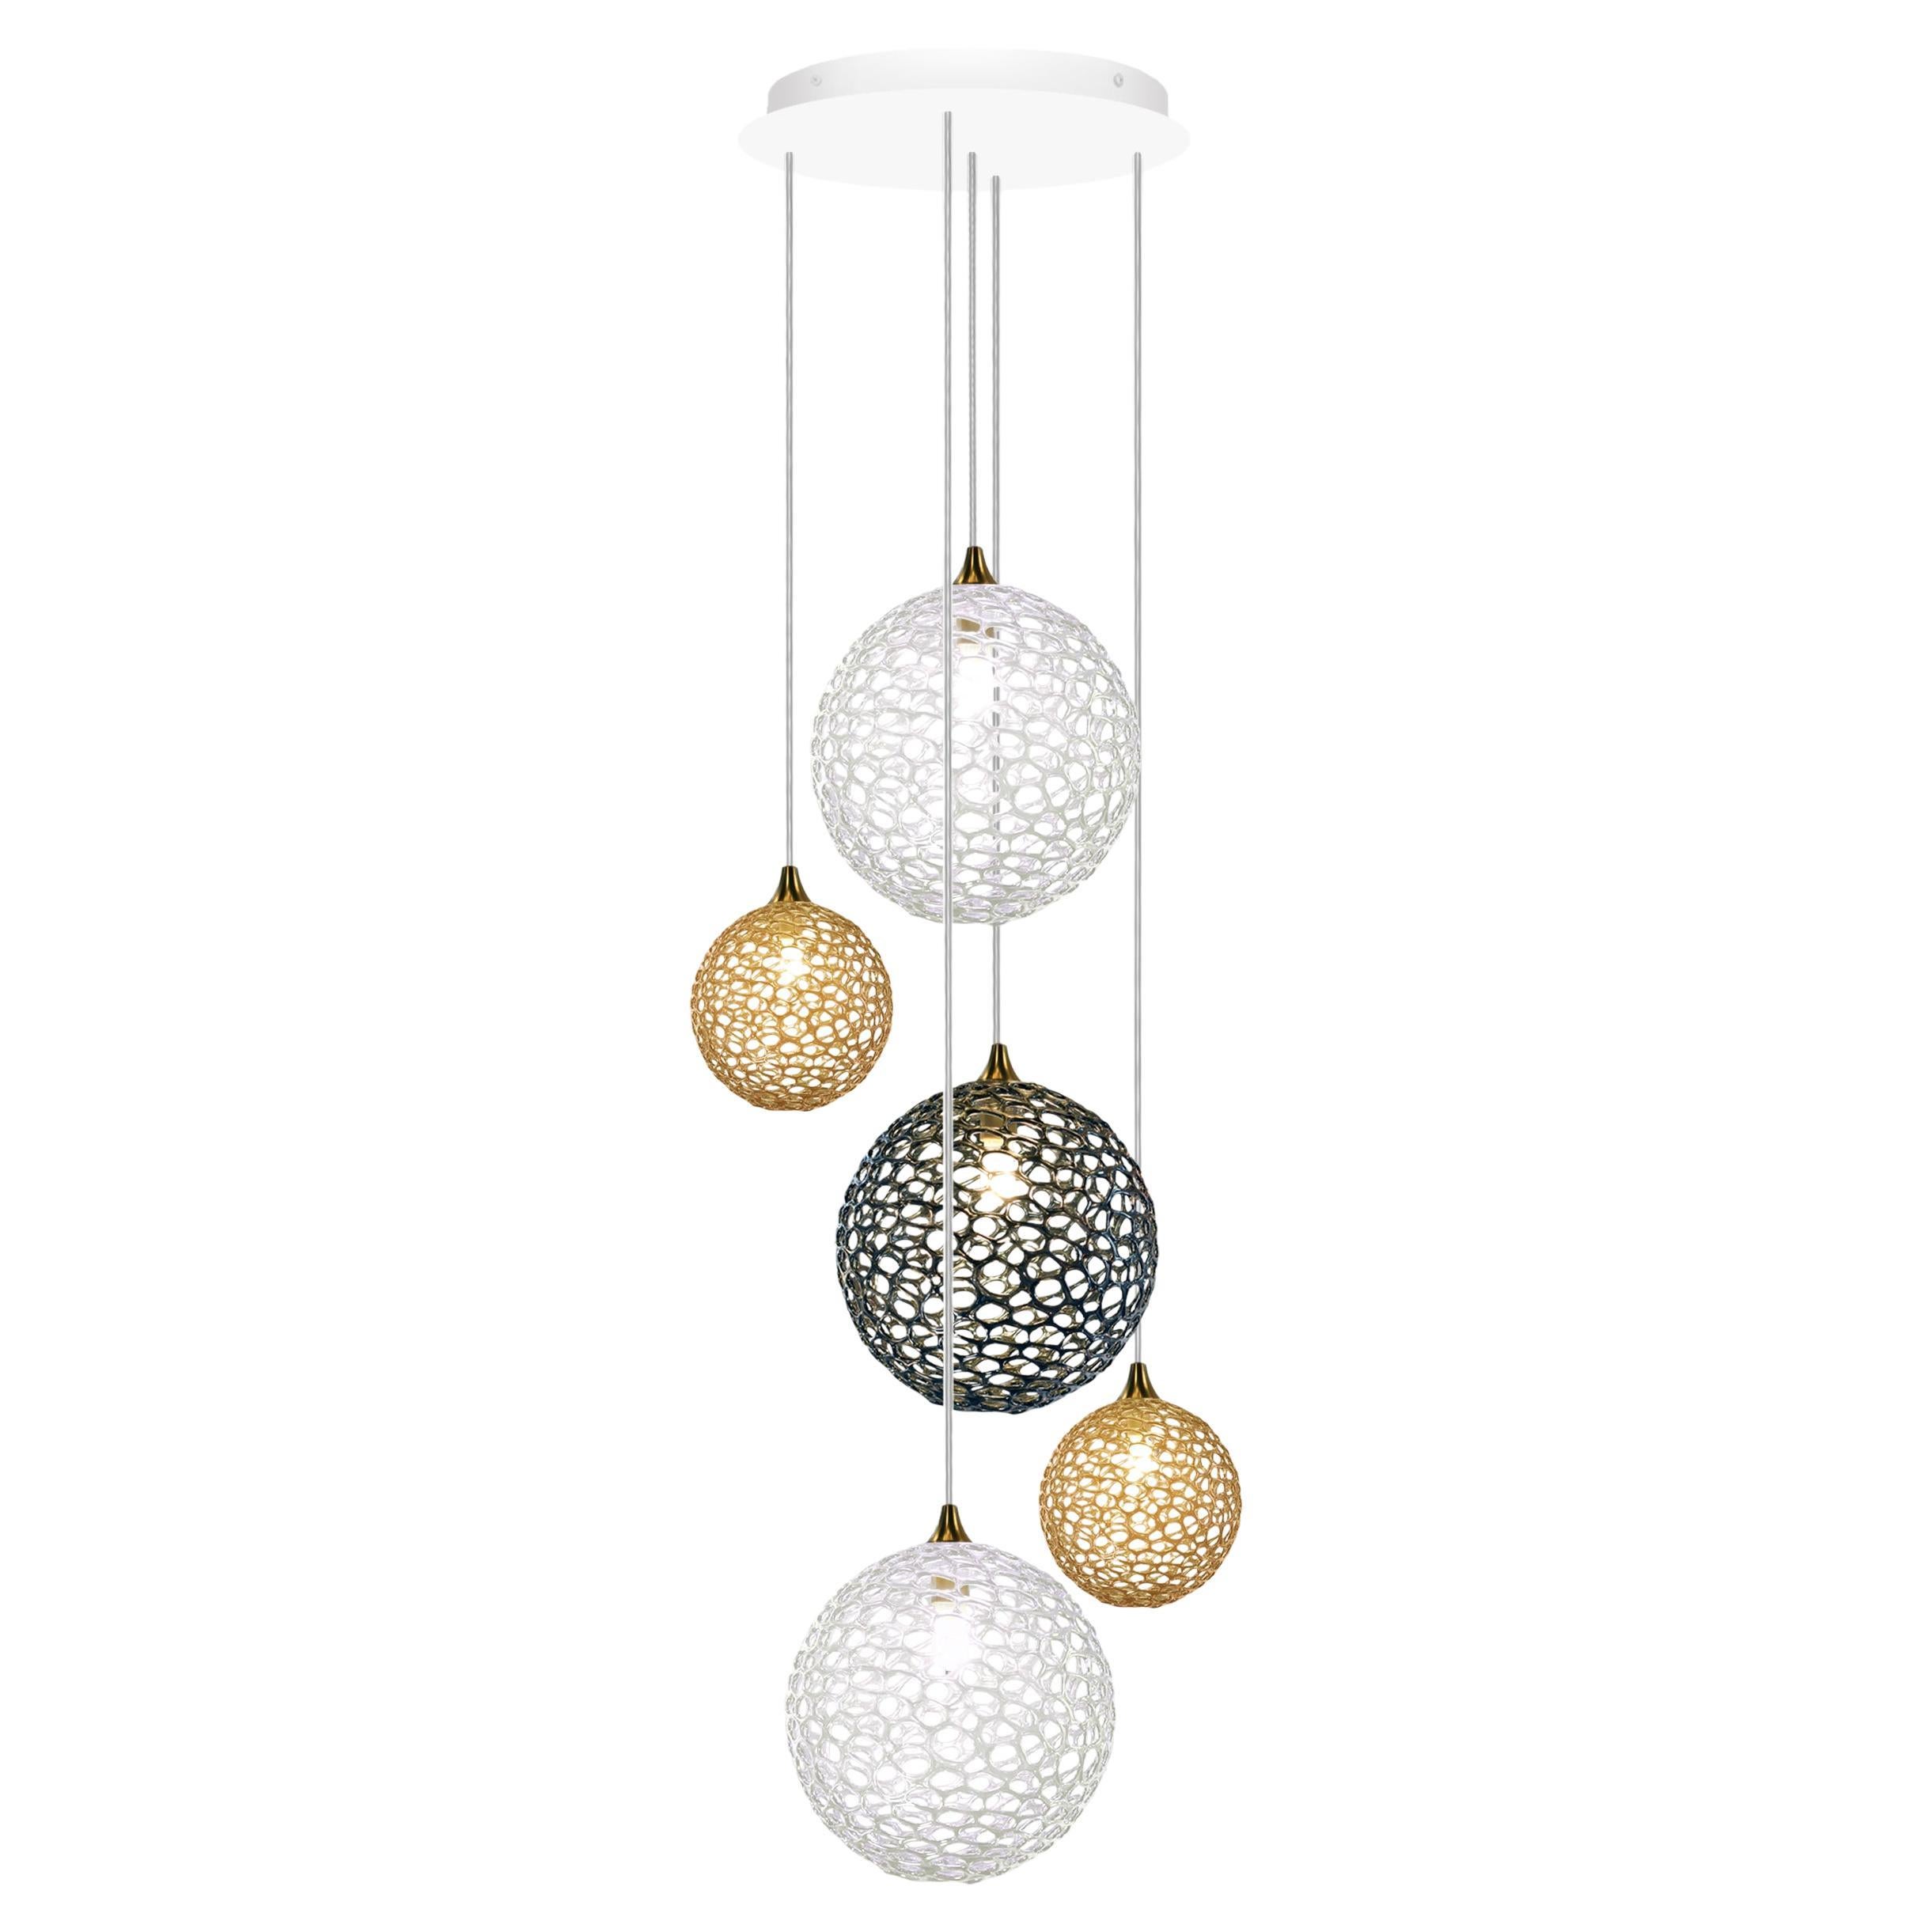 Napa 5 Art Glass Pendants Chandelier in Clear, Amber and Grey Glass Colors. LED For Sale